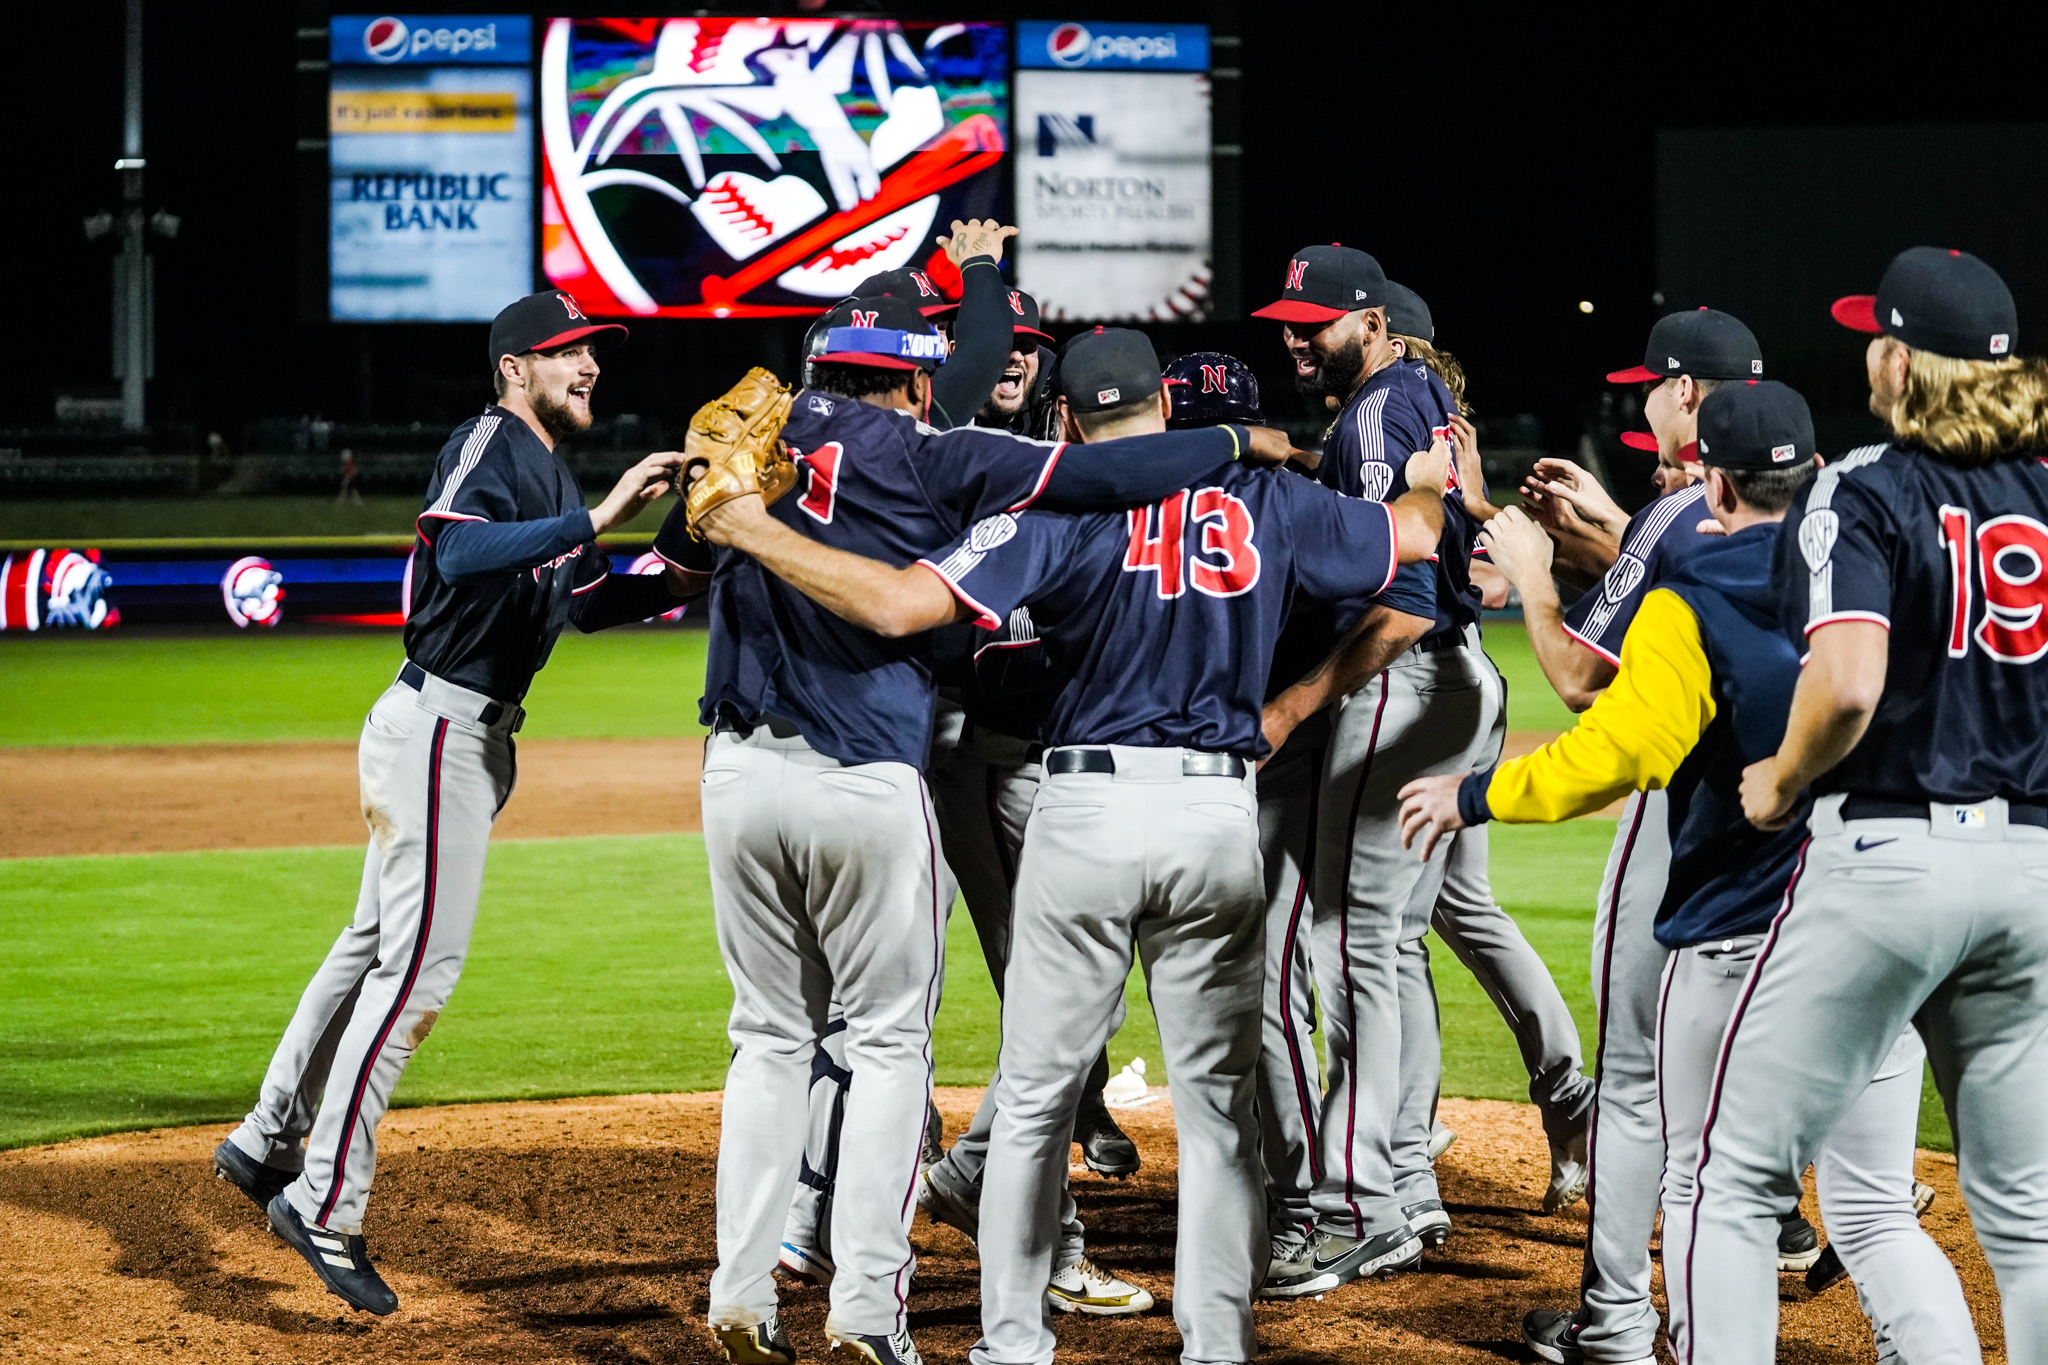 Season Preview: The Nashville Sounds Have Top-Tier Talent & You Should Pay  Attention - The Sports Credential